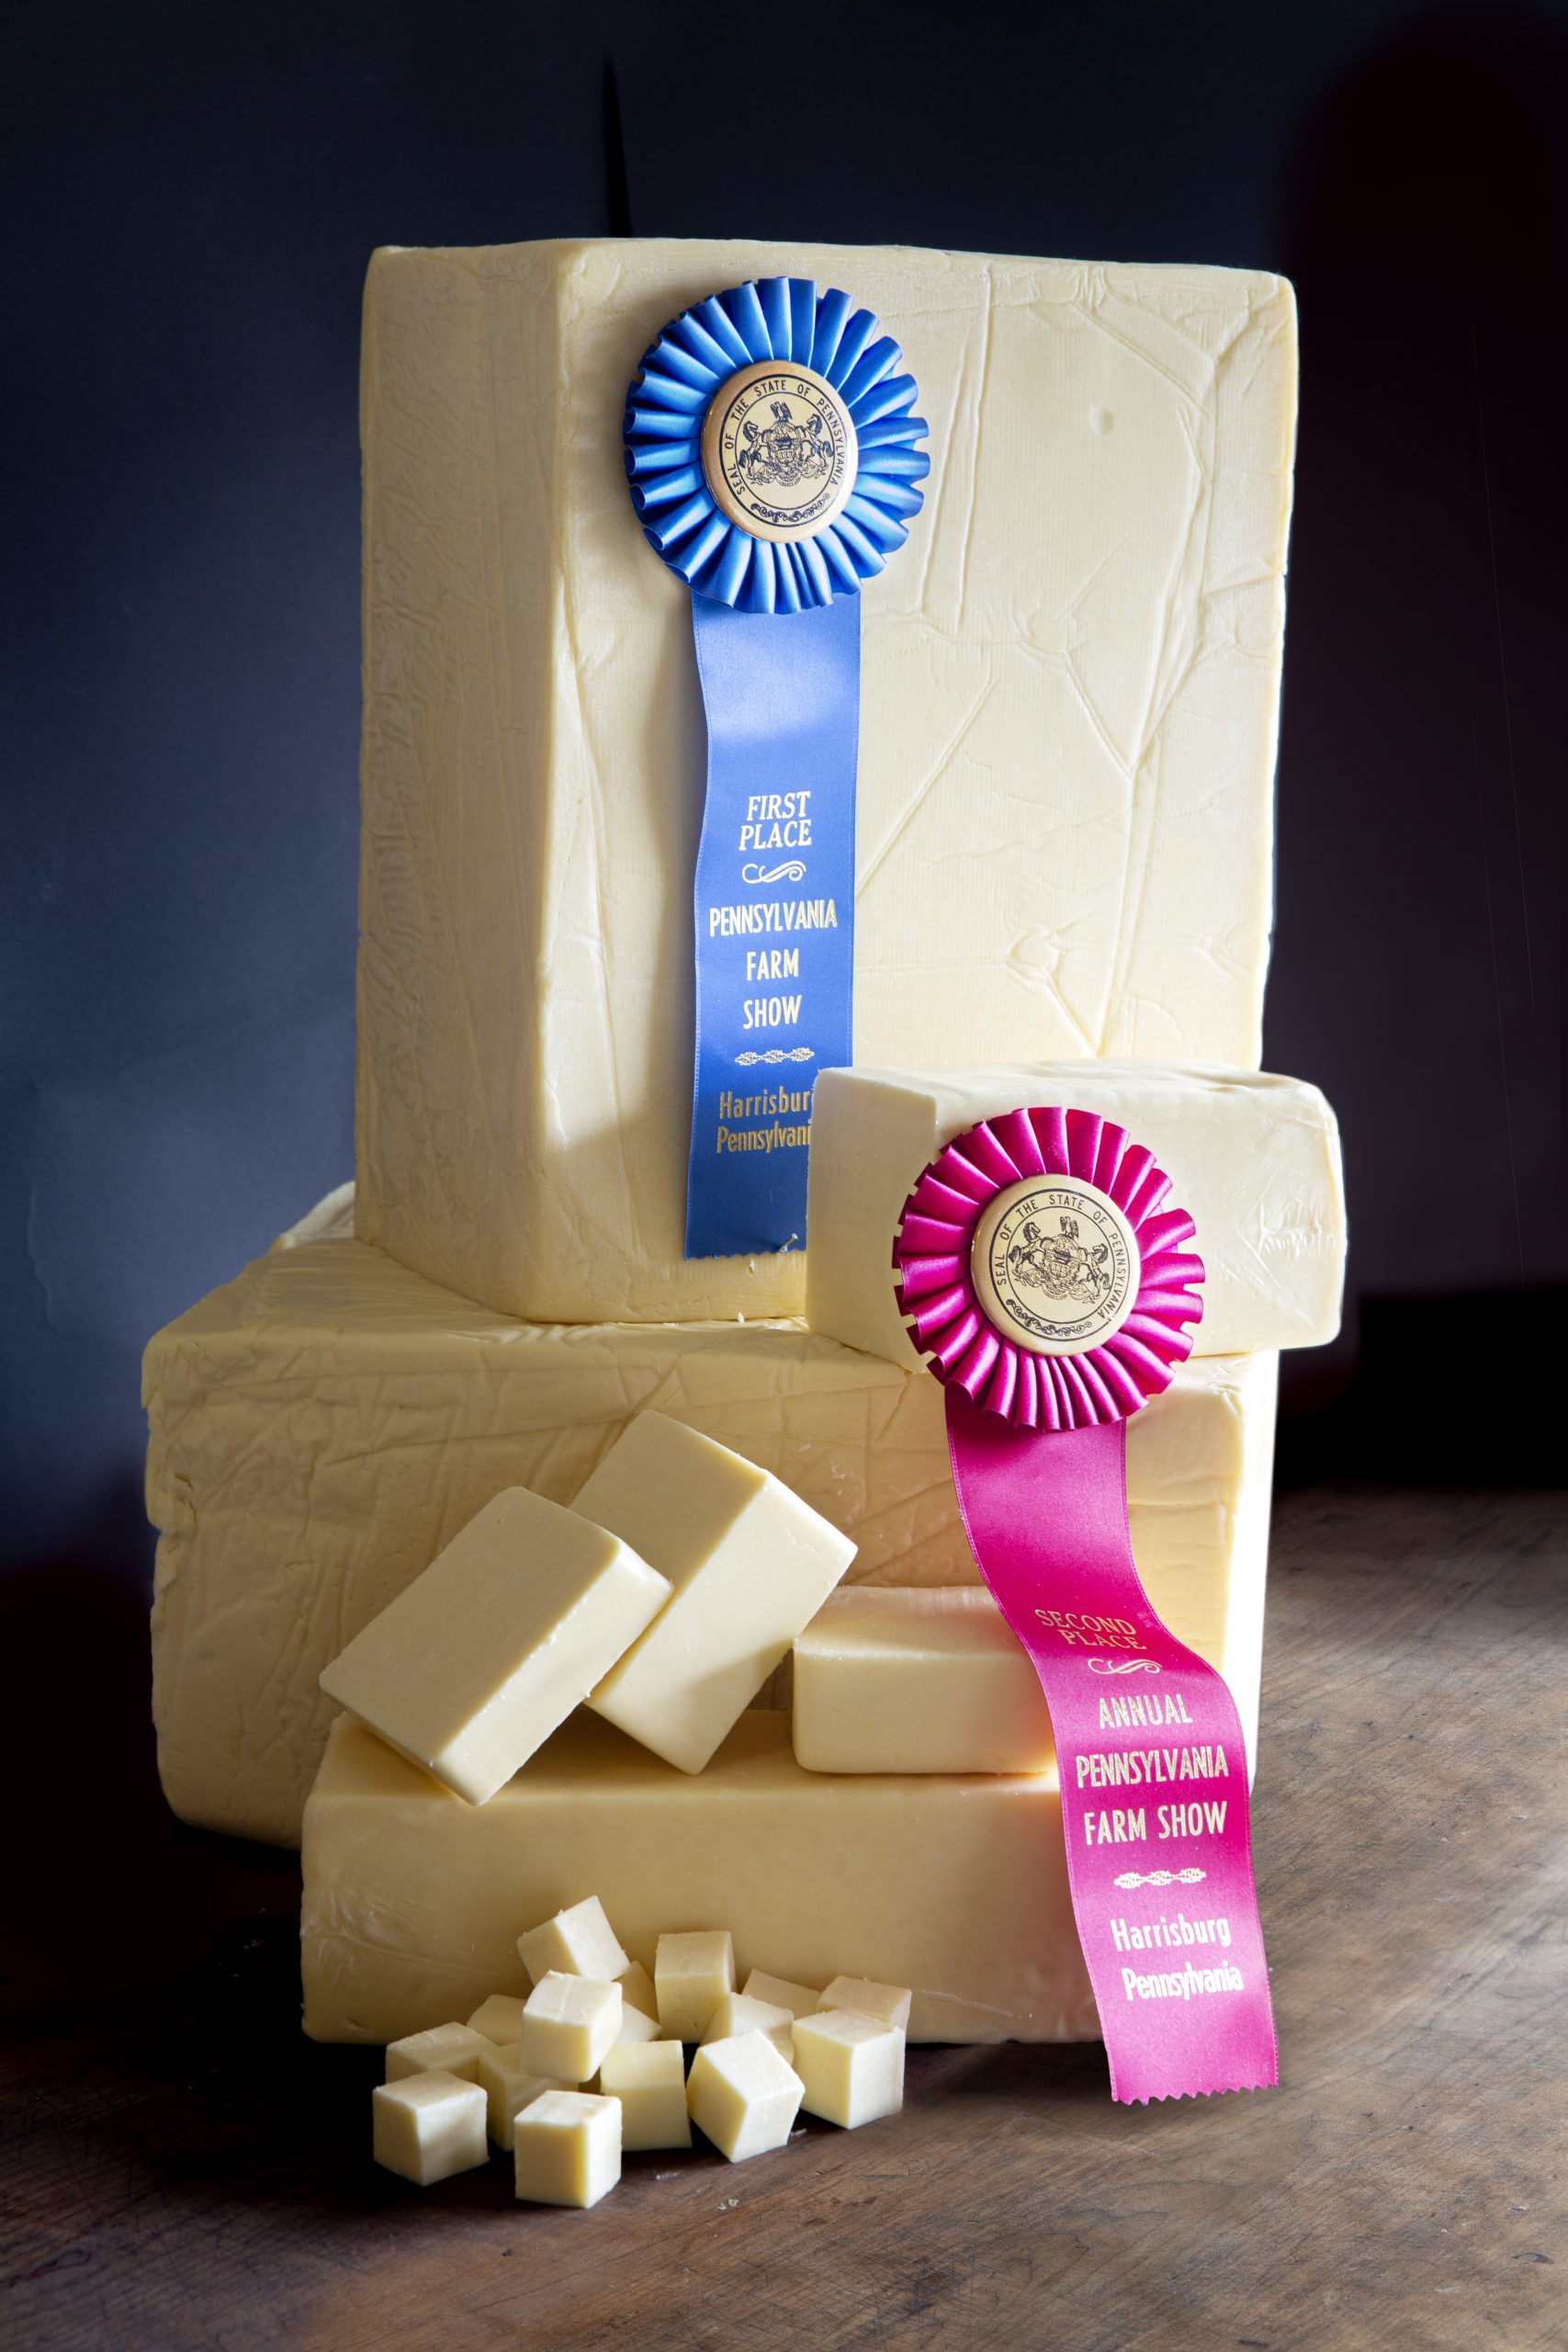 awards-cheese-pennsylvania-farmshow-food-photography-ideas-gallery-showcase-services-by-photographer-serving-food-service-companies-scaled